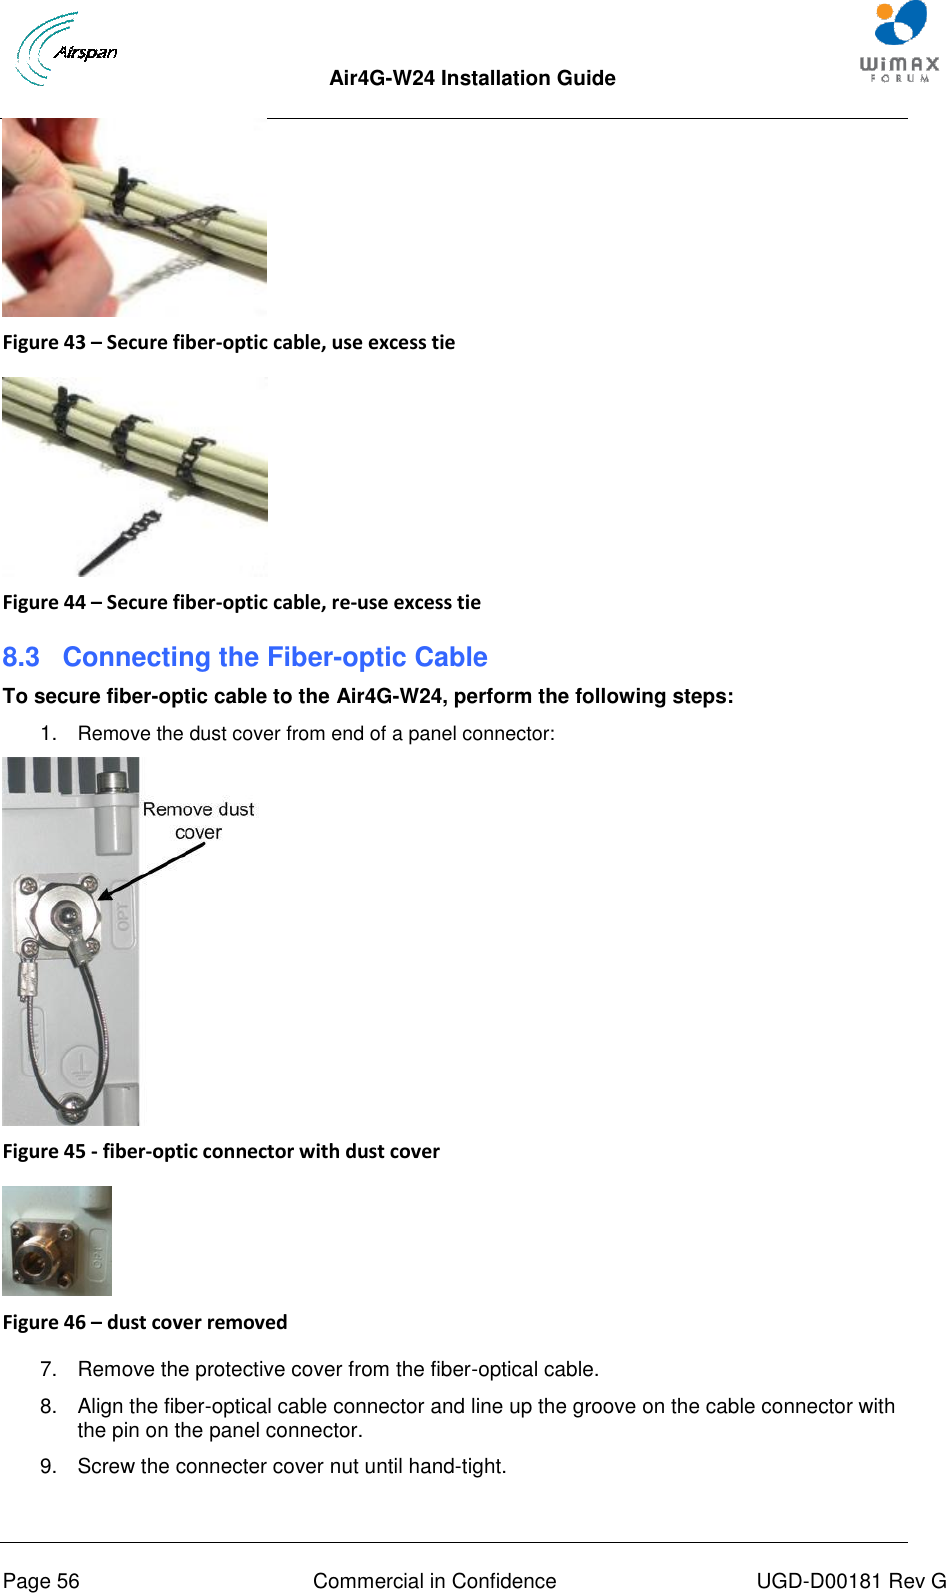  Air4G-W24 Installation Guide       Page 56  Commercial in Confidence  UGD-D00181 Rev G  Figure 43 – Secure fiber-optic cable, use excess tie   Figure 44 – Secure fiber-optic cable, re-use excess tie 8.3  Connecting the Fiber-optic Cable To secure fiber-optic cable to the Air4G-W24, perform the following steps: 1.  Remove the dust cover from end of a panel connector:  Figure 45 - fiber-optic connector with dust cover   Figure 46 – dust cover removed  7.  Remove the protective cover from the fiber-optical cable. 8.  Align the fiber-optical cable connector and line up the groove on the cable connector with the pin on the panel connector. 9.  Screw the connecter cover nut until hand-tight. 